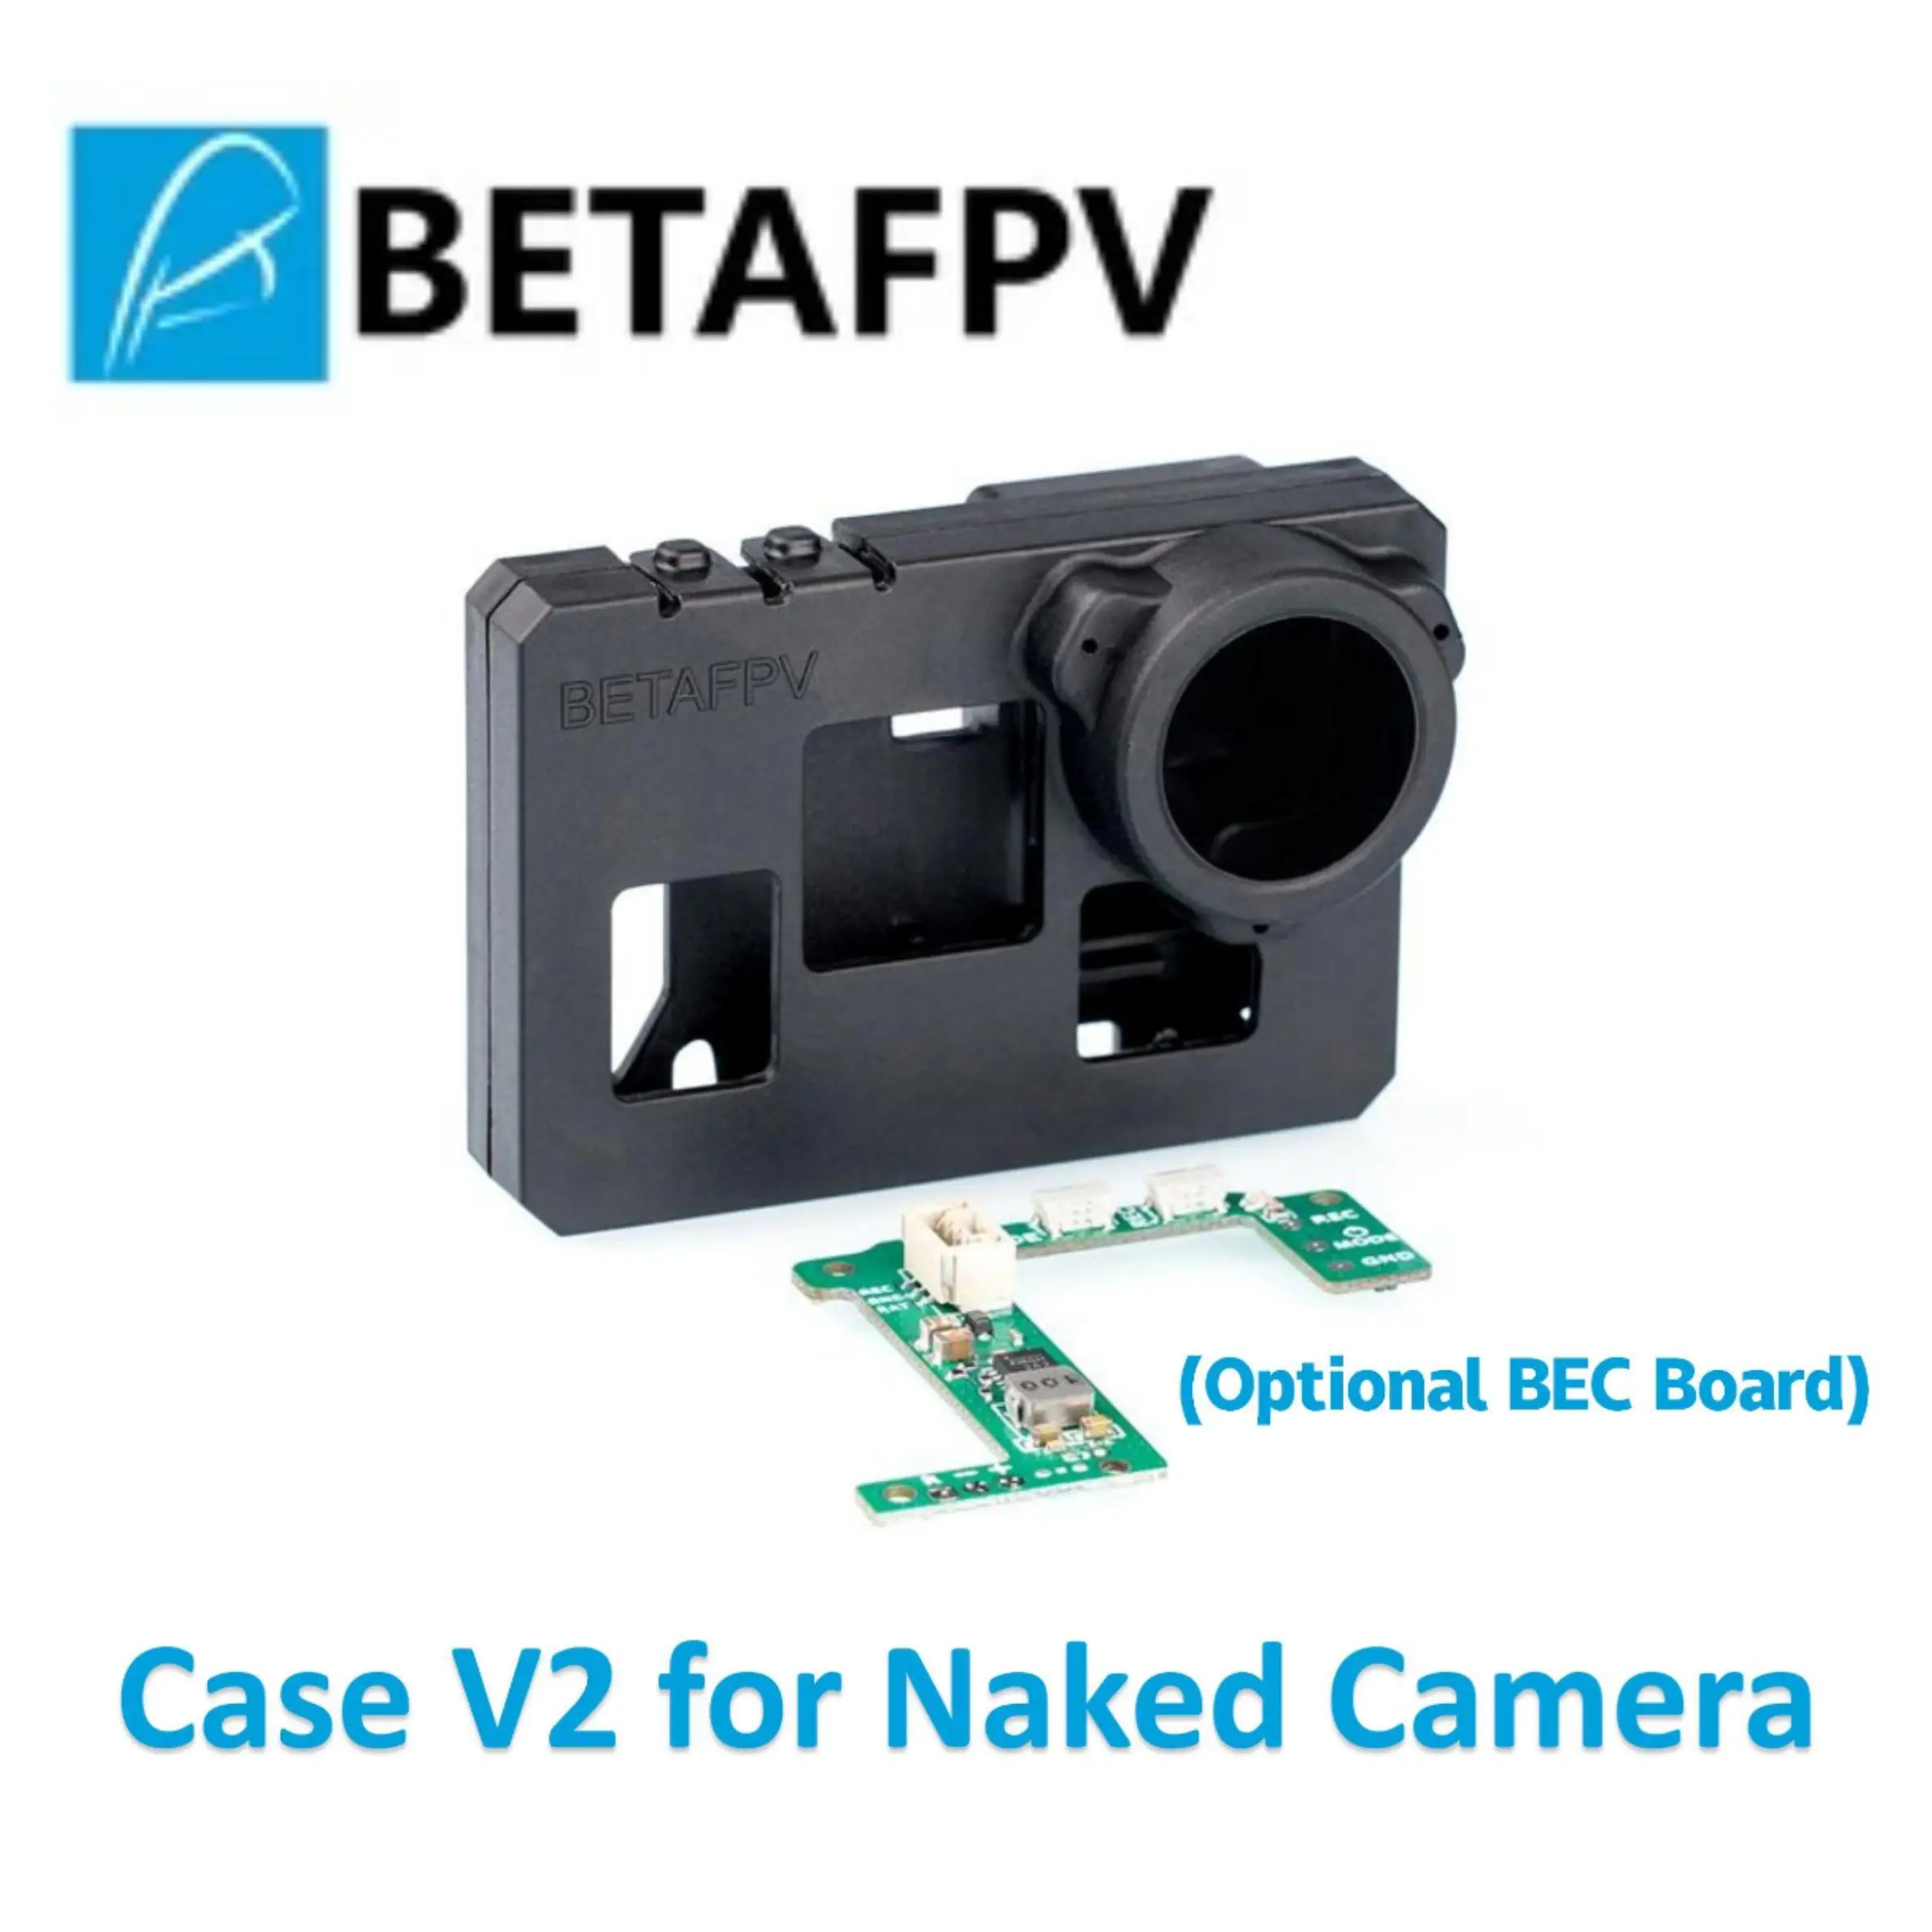 BETAFPV Case V2 for Naked Camera Protective Case With BEC Board for GoPro Hero 6/7 Light Weight Crush Sustainable RC Drone